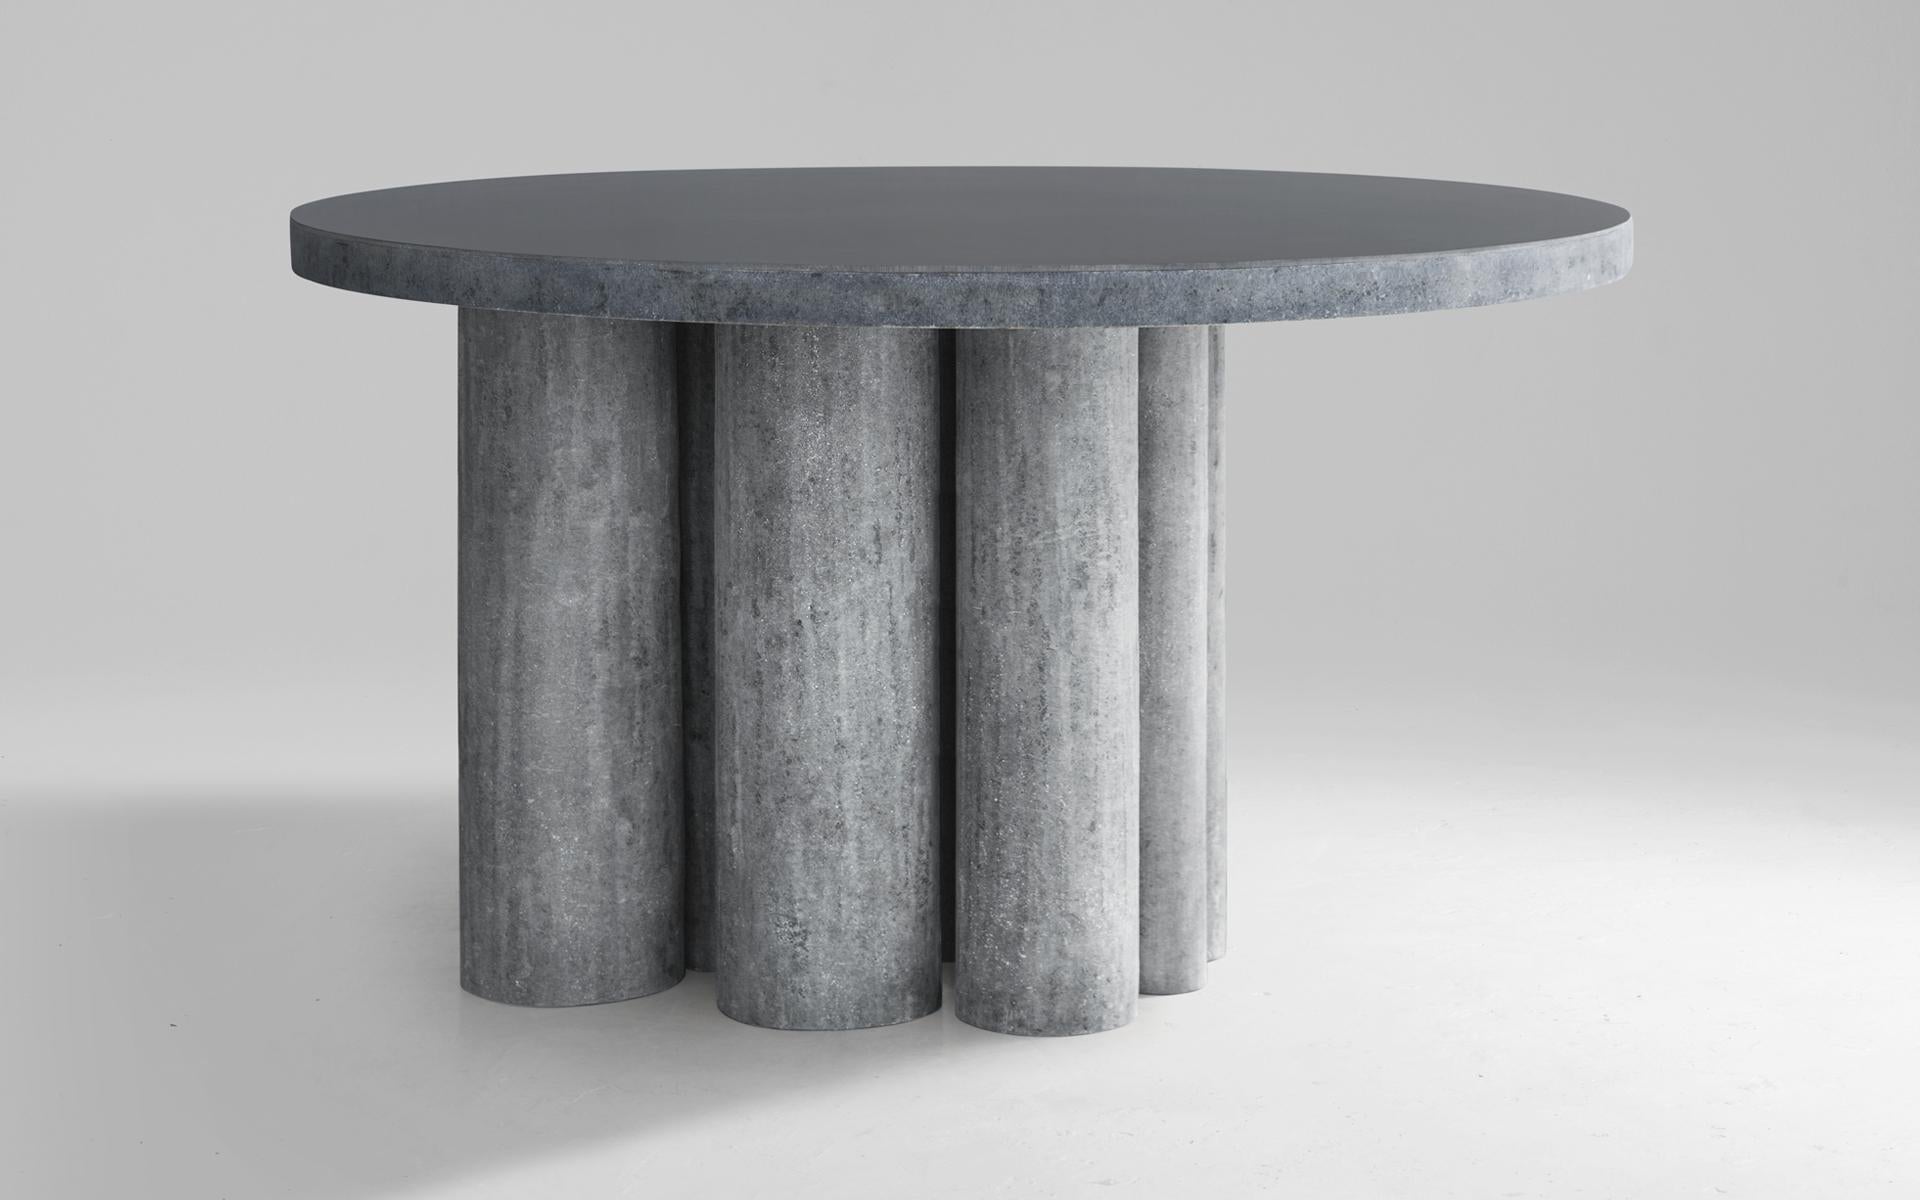 Òrghen table by Imperfettolab
Dimensions: Ø 125 x H 74 cm
Materials: Raw Material

Imperfetto Lab
Who we are ? We are a family.
Verter Turroni, Emanuela Ravelli and our children Elia, Margherita and Eusebio.
All together, we are separate